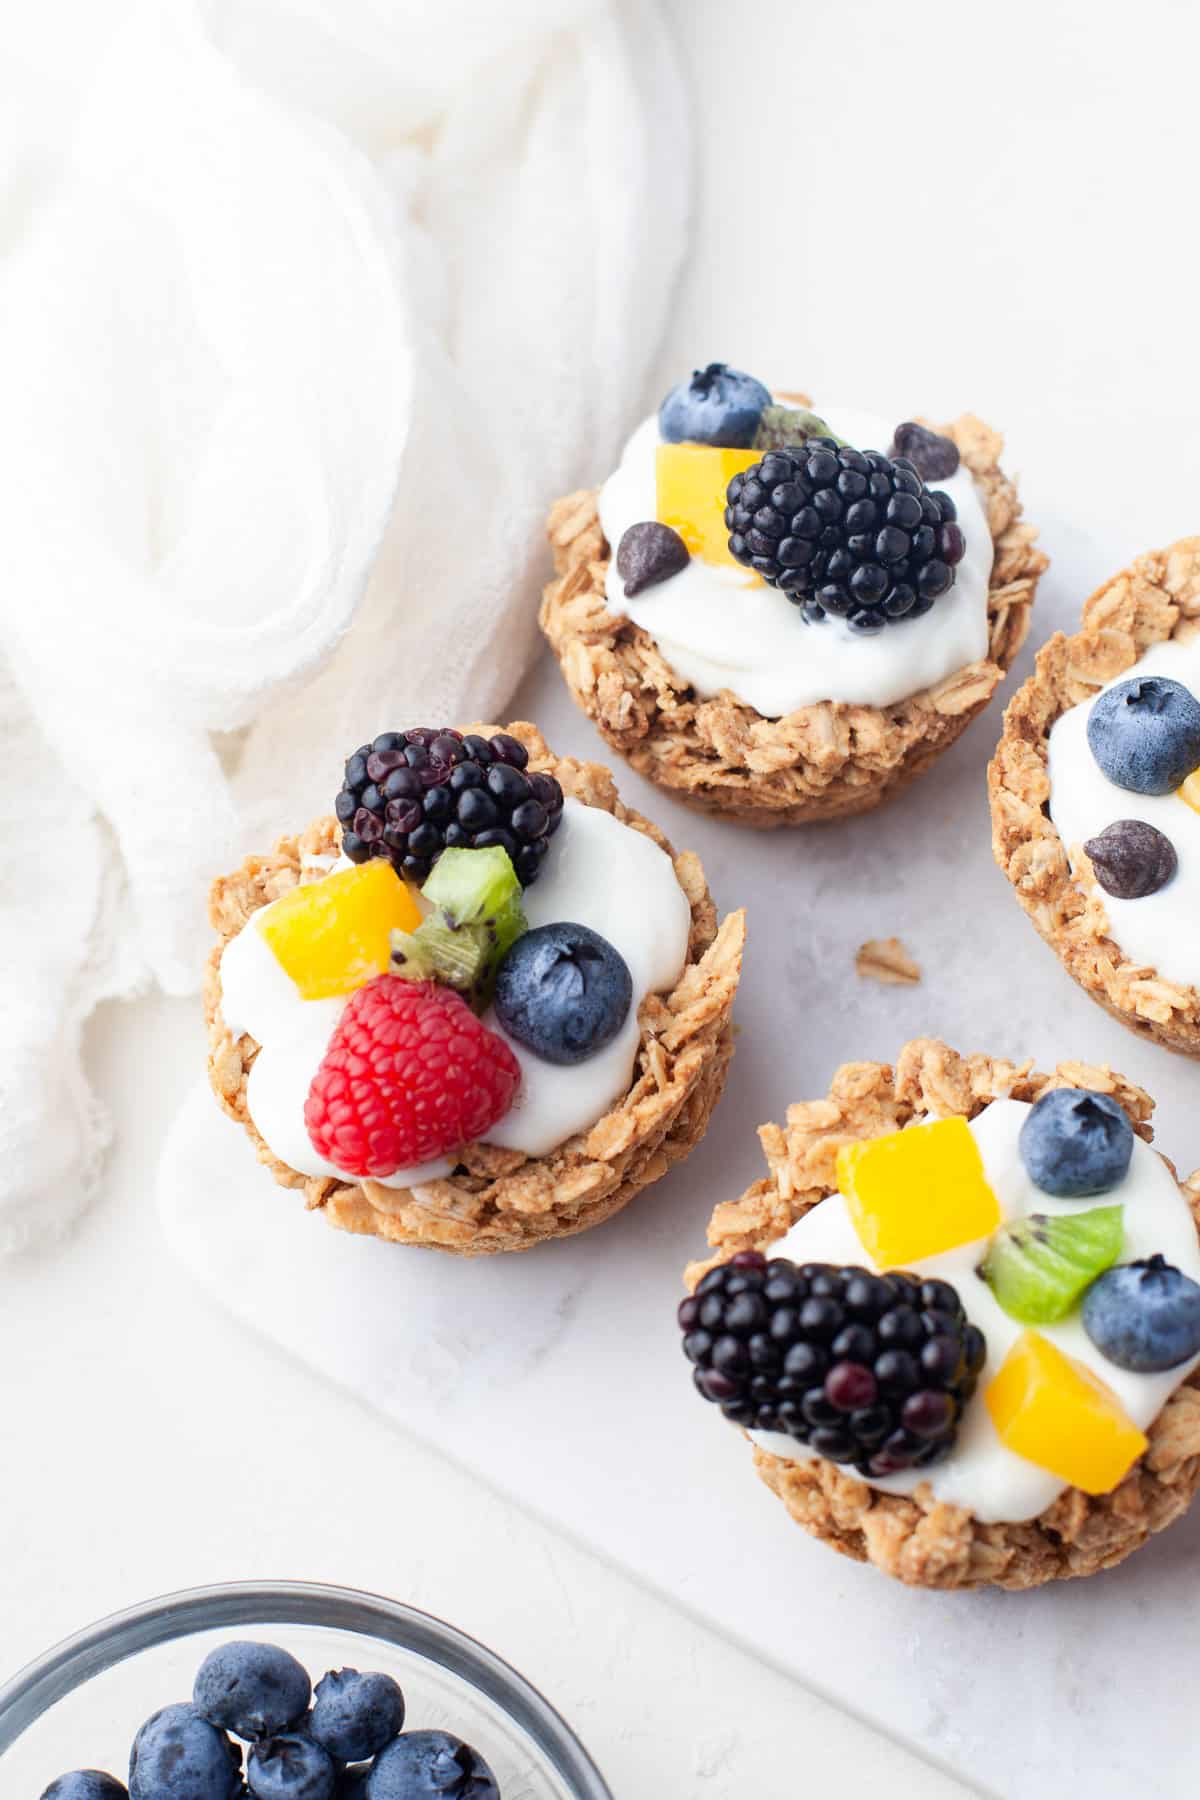 Oatmeal cups filled with yogurt and fresh fruit.